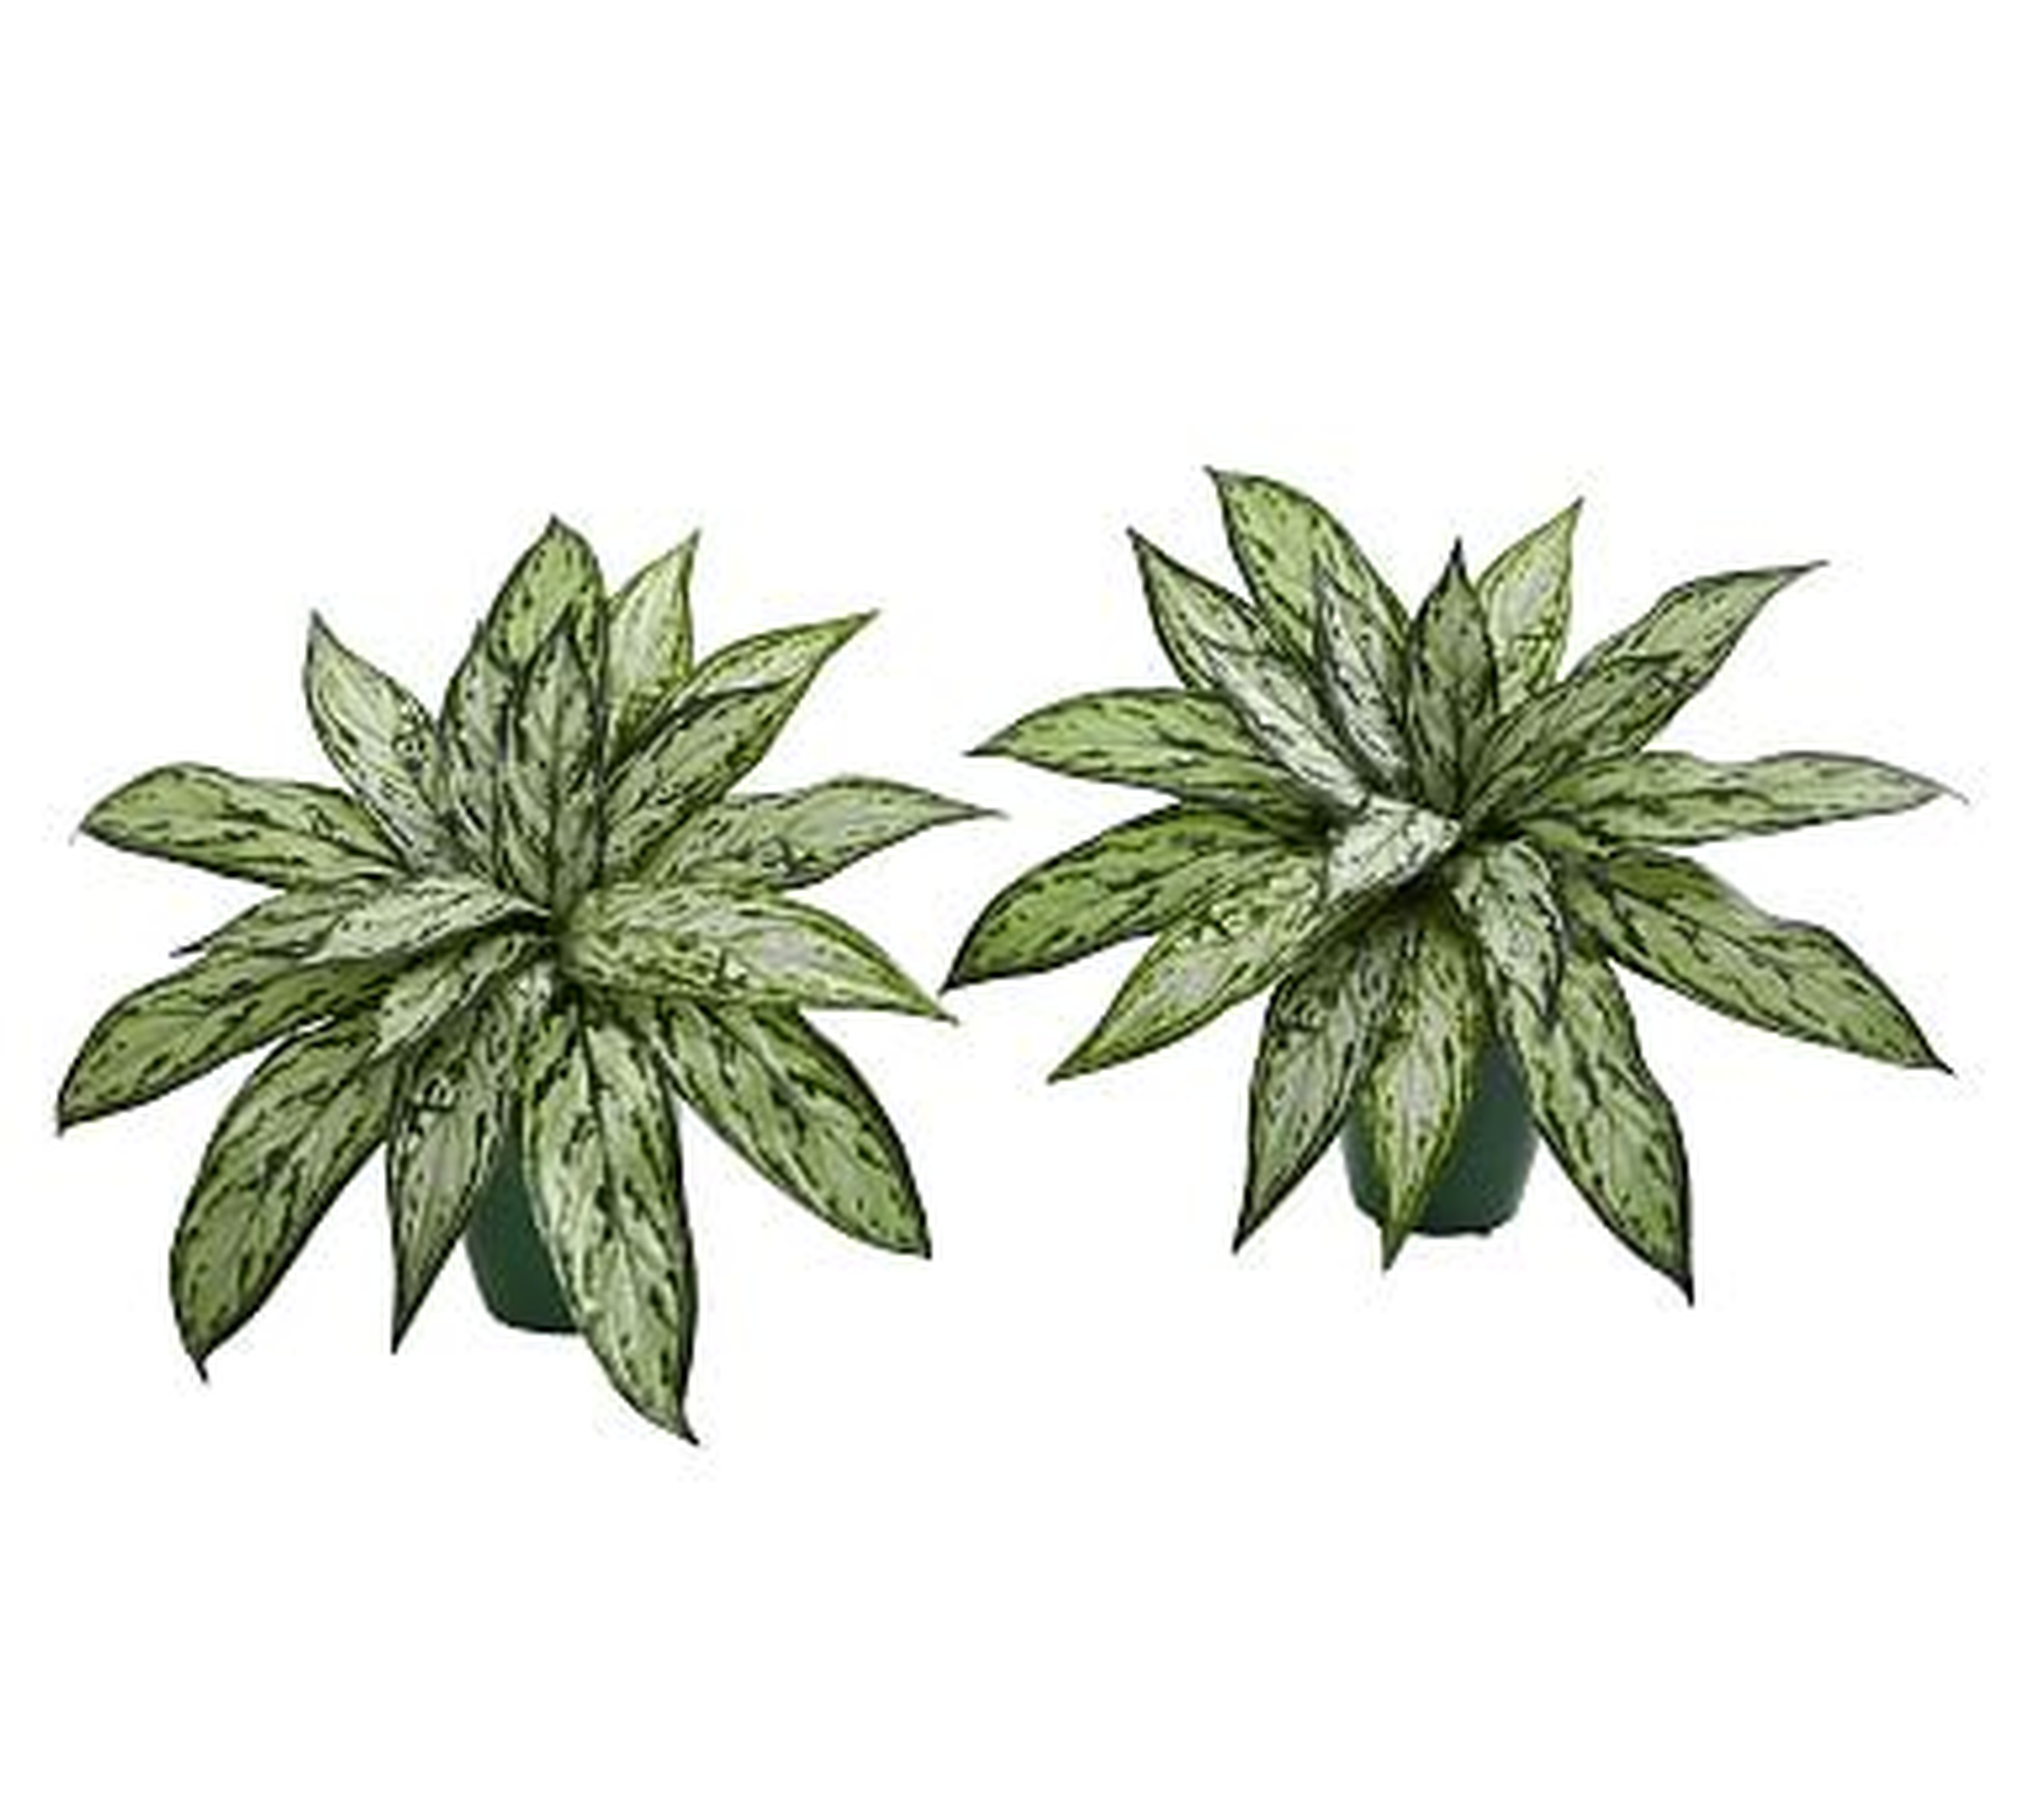 Silver Queen Faux Plant, Set of 2 - Pottery Barn